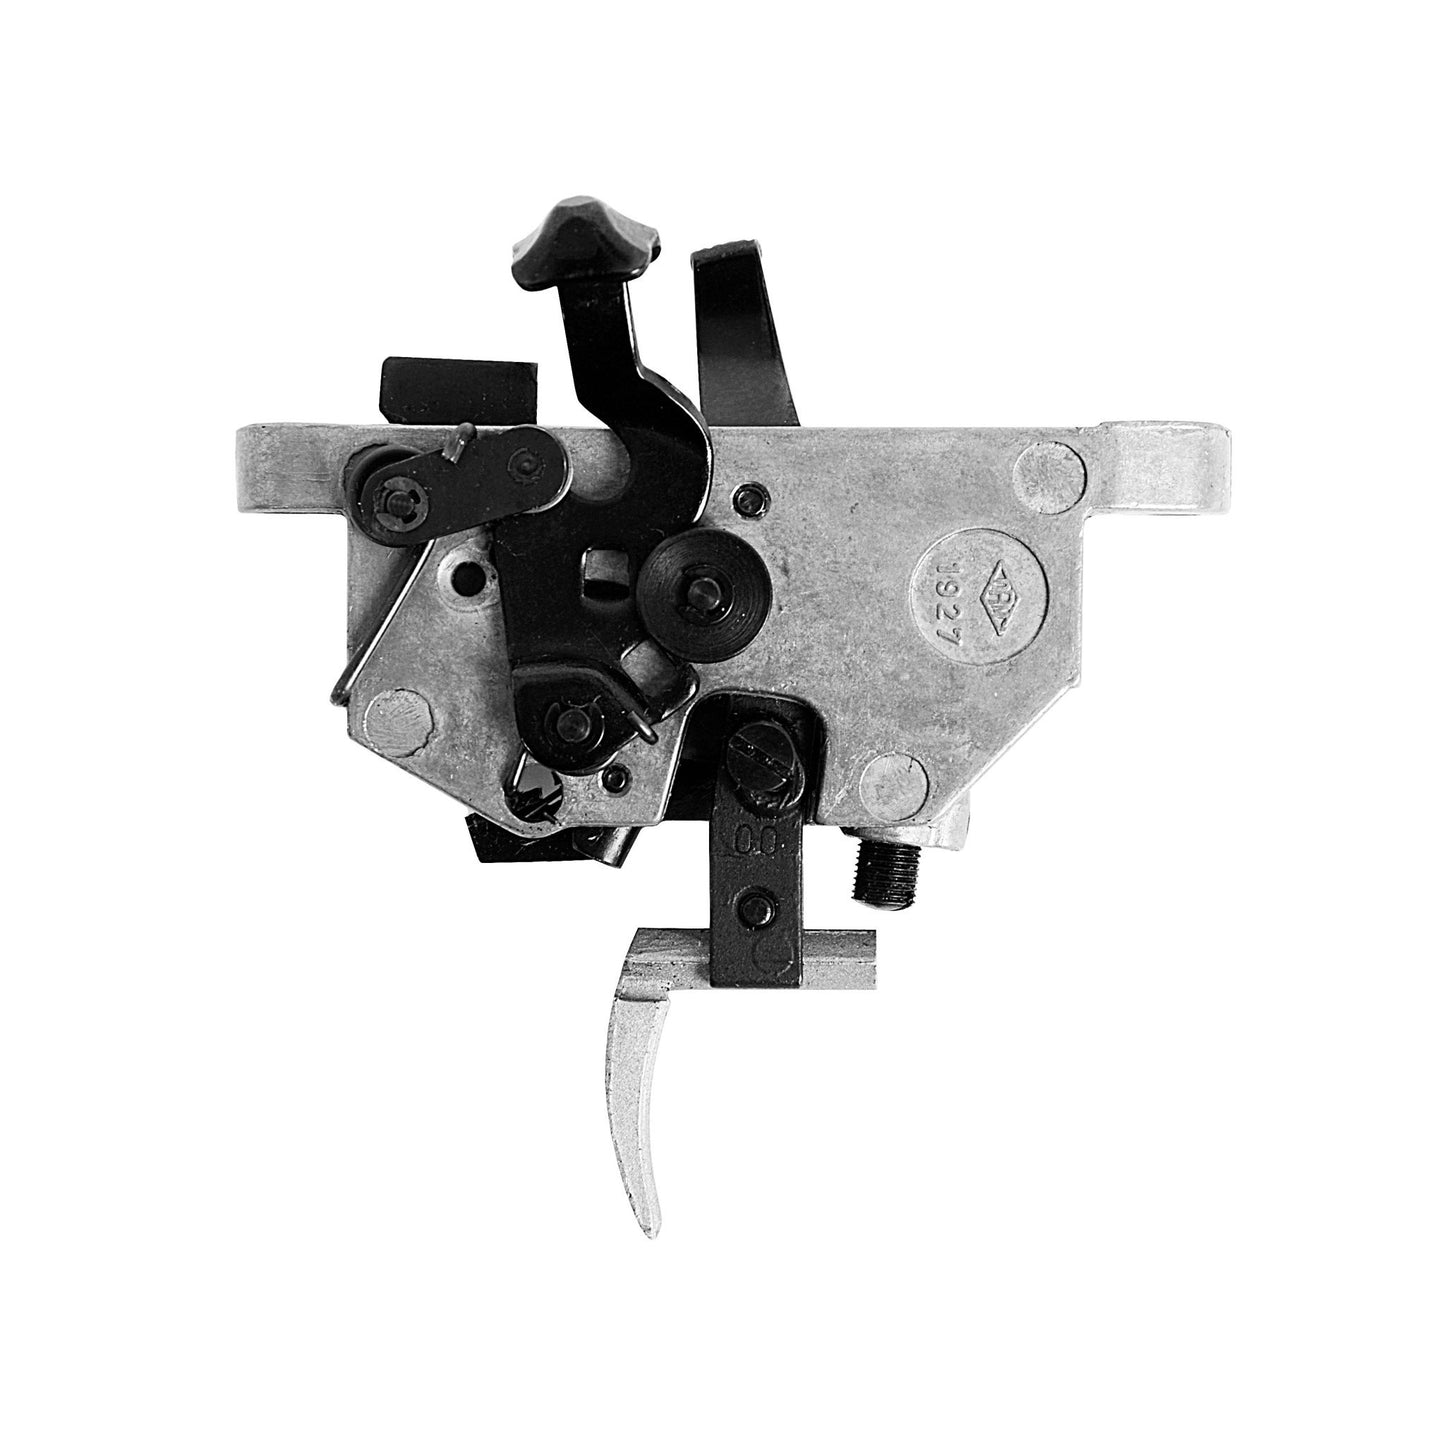 Anschutz 5098 Two-Stage Trigger 175-450g